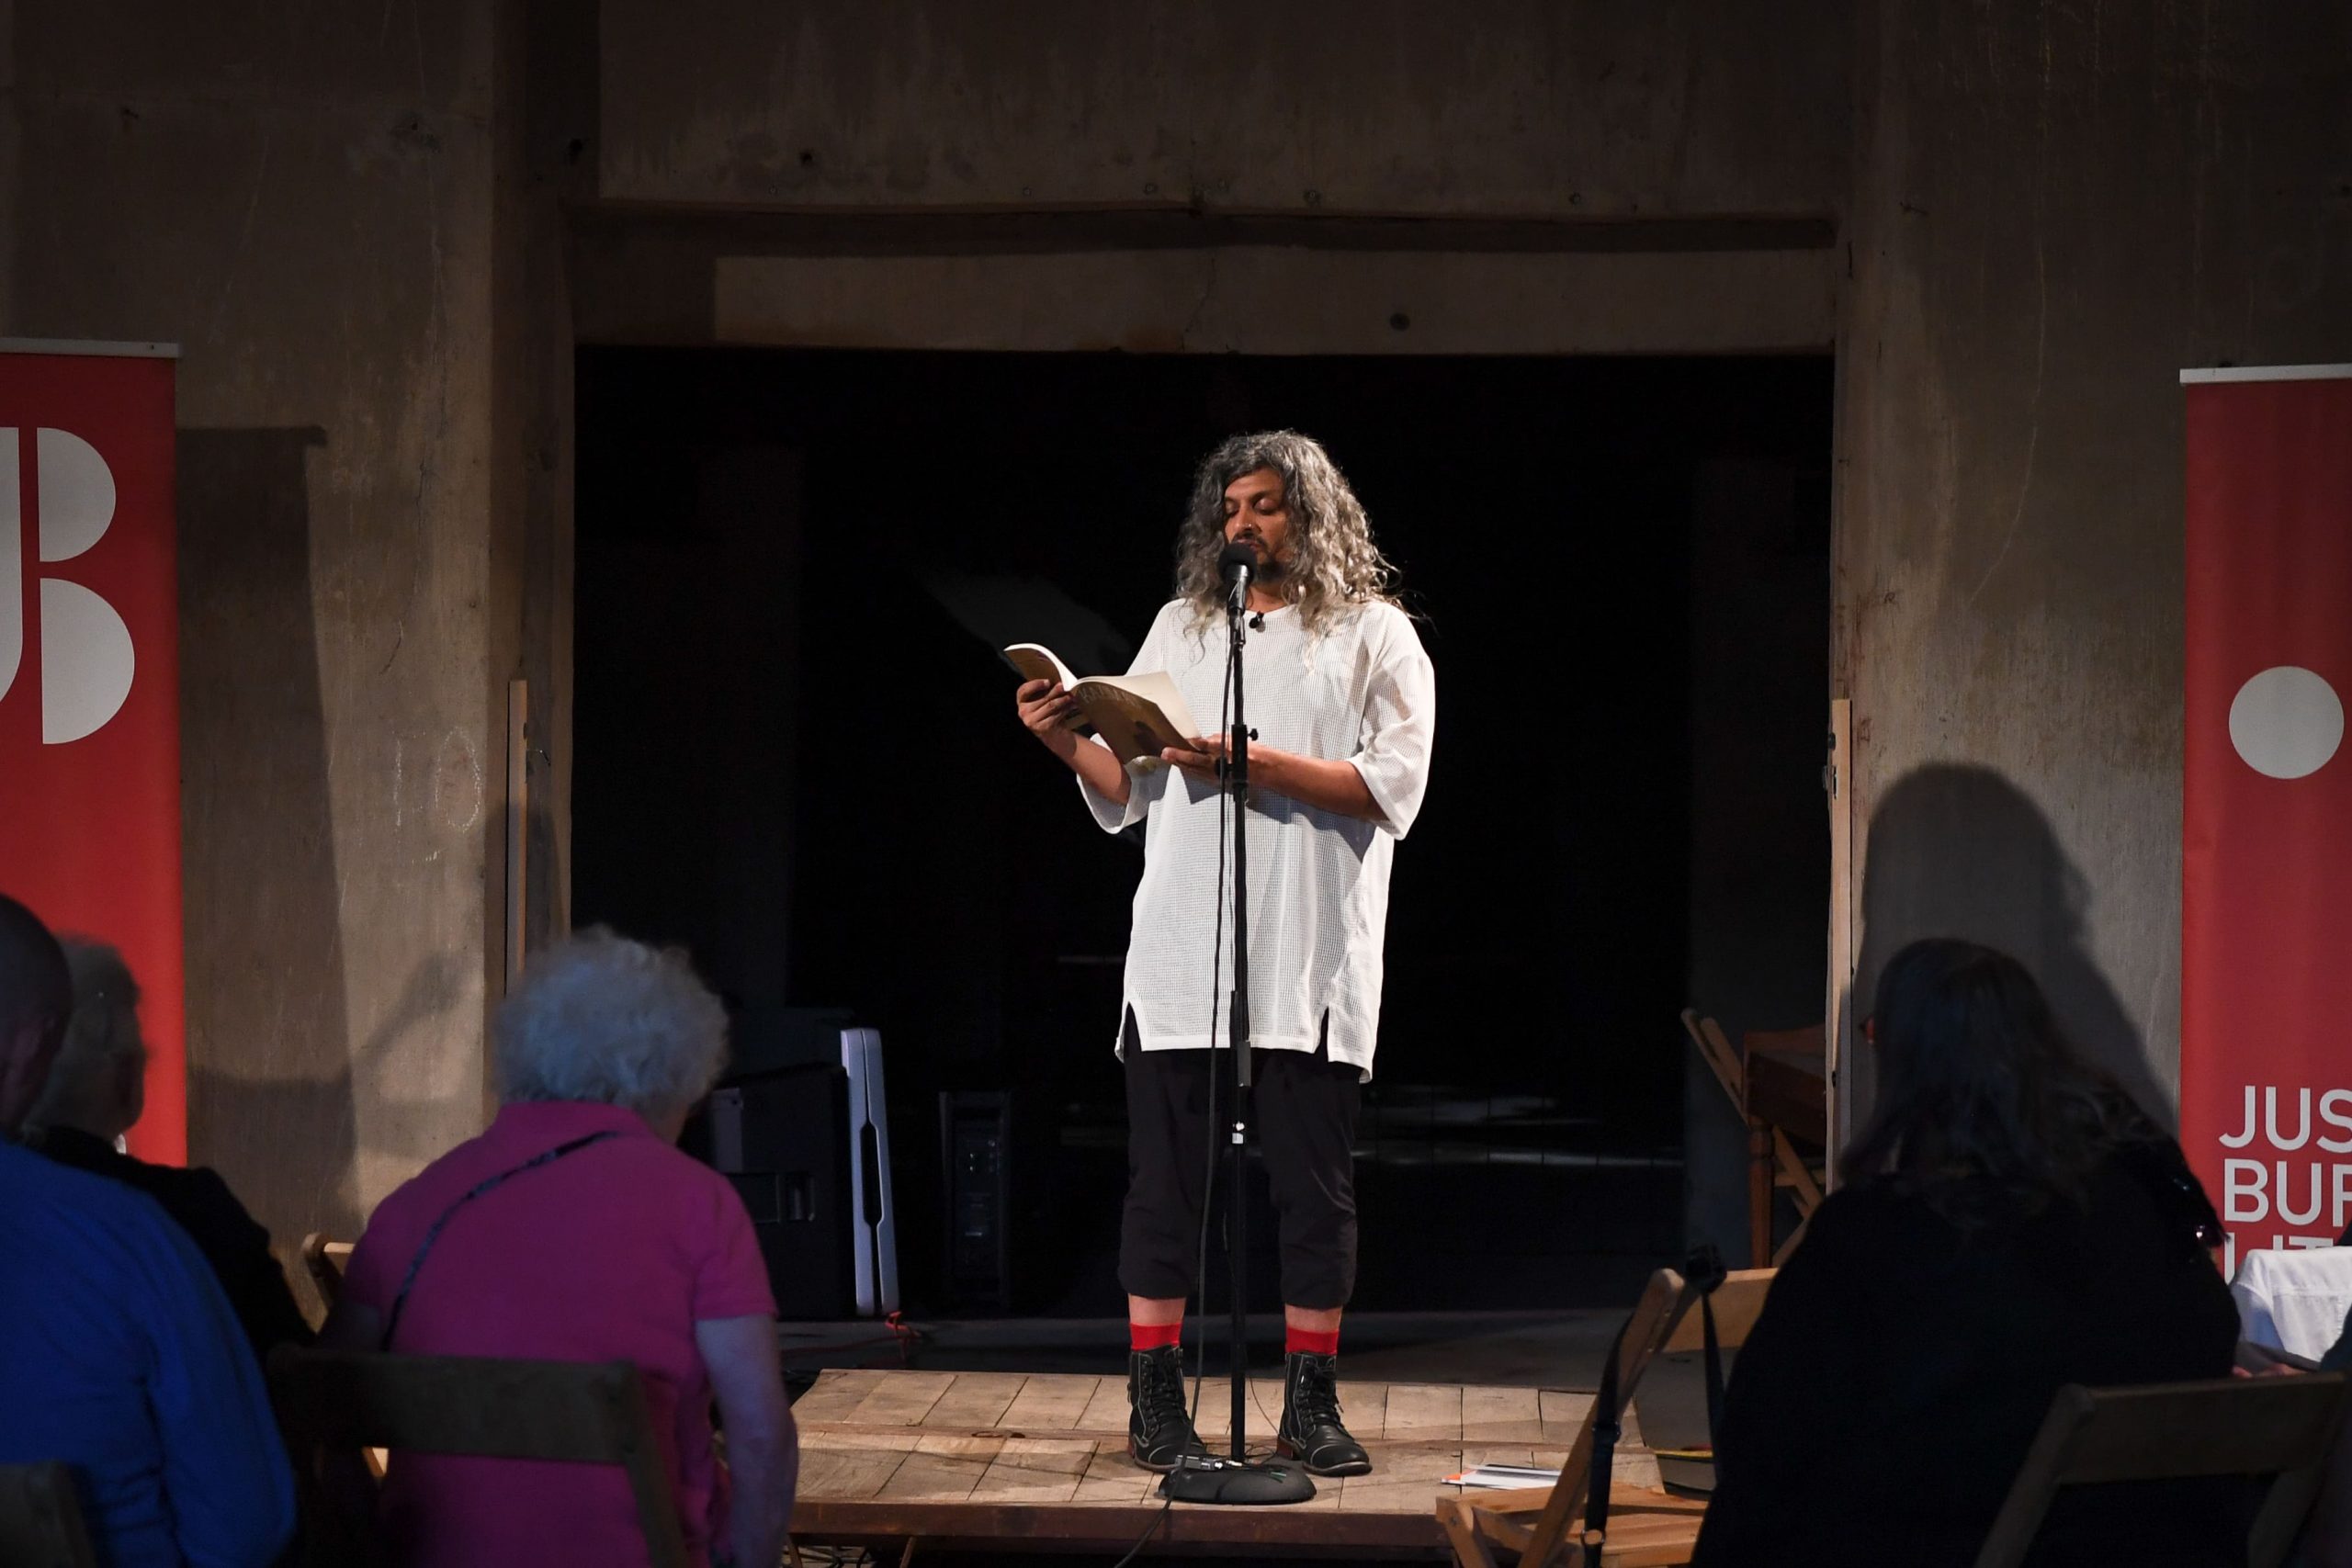 Kazim Ali reads at the Silo City Reading Series on August 18, 2018